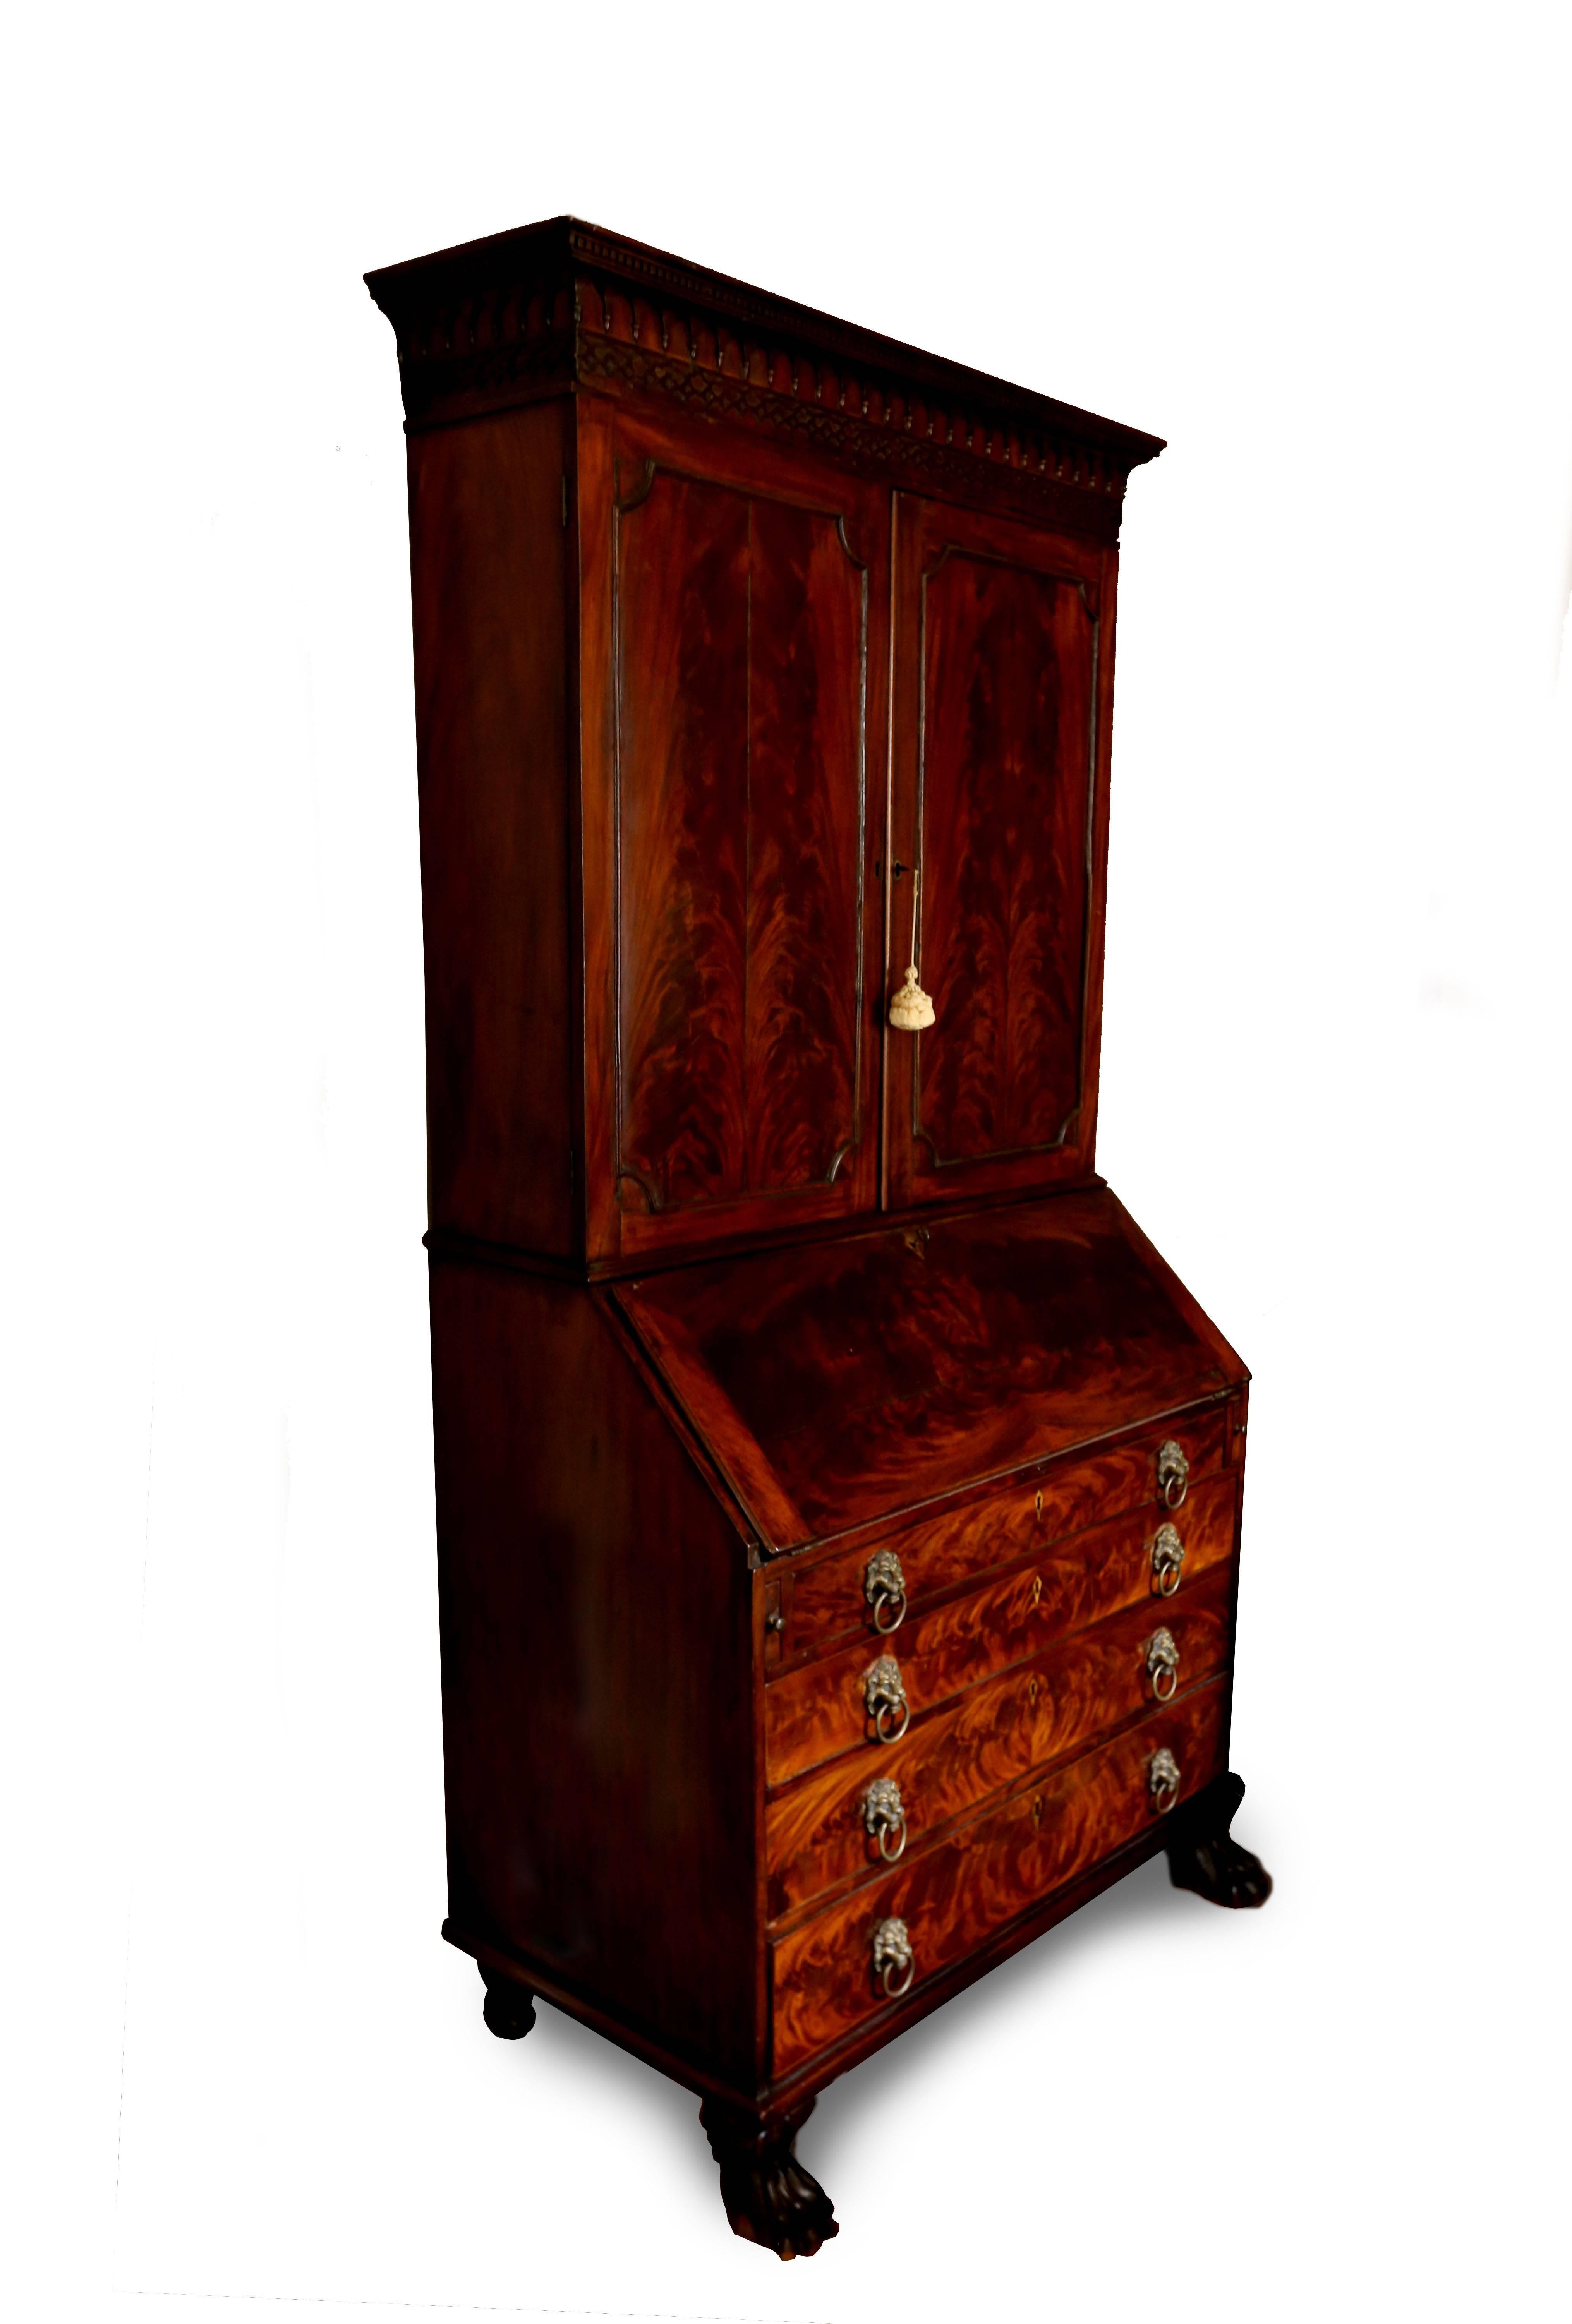 Magnificent flame mahogany secretary. The cornice of the piece features fine dentils, gothic arches, and delicate blind fretwork. The upper two doors of paired veneer open to sets of original shelves with adjustable supports. The matchbook veneer